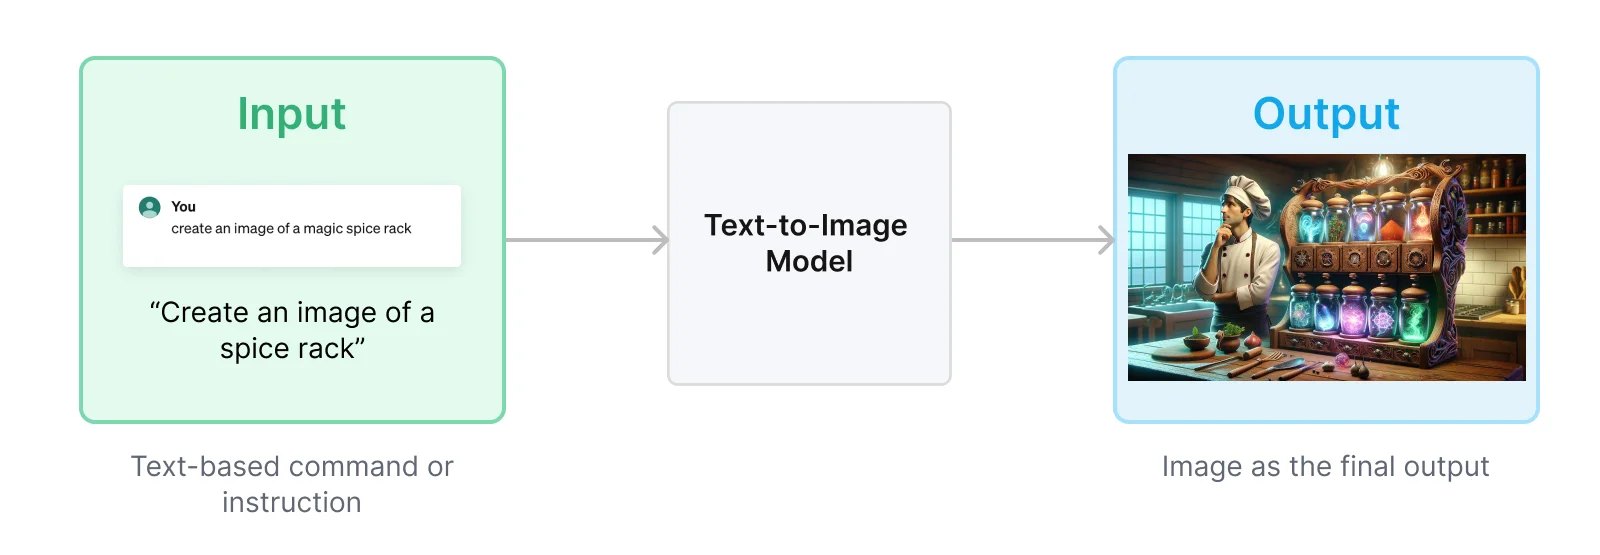 text to image model example